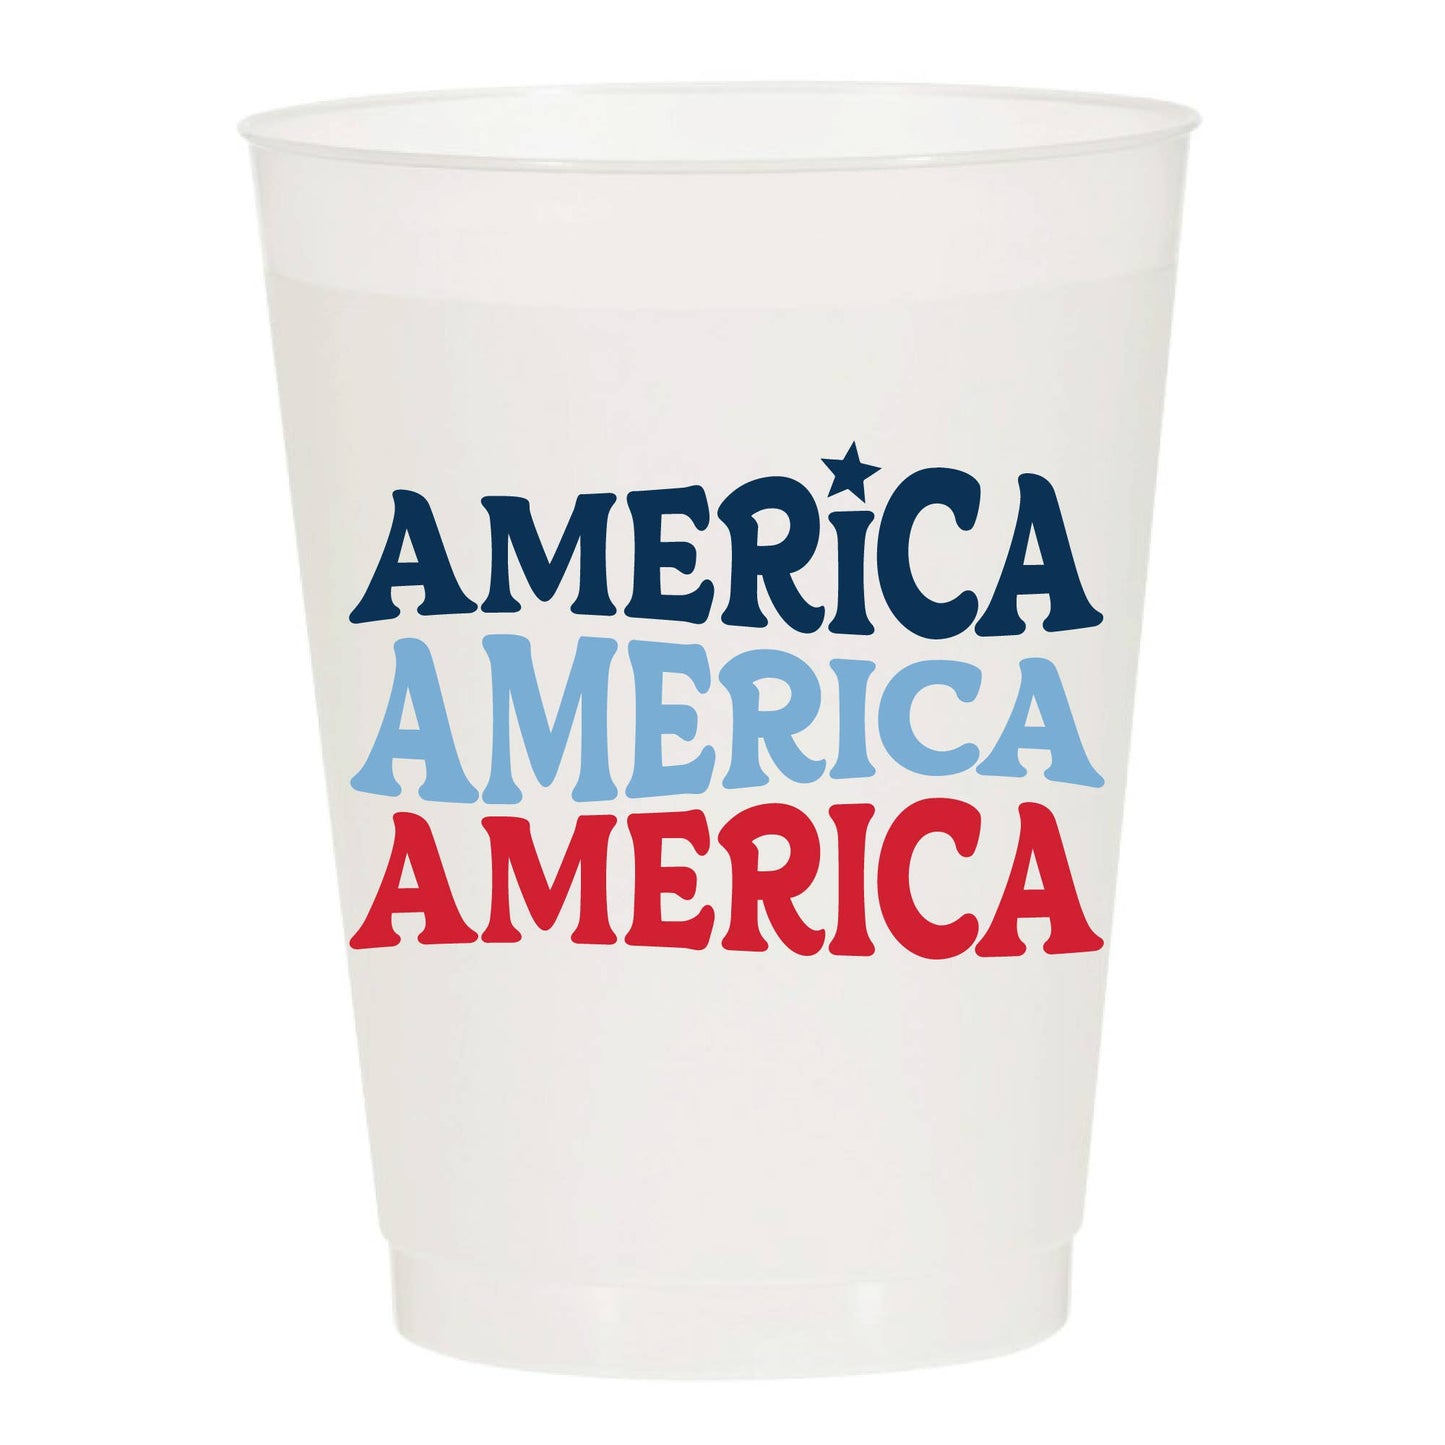 America x 3 Frosted Cups - Patriotic: Pack of 6